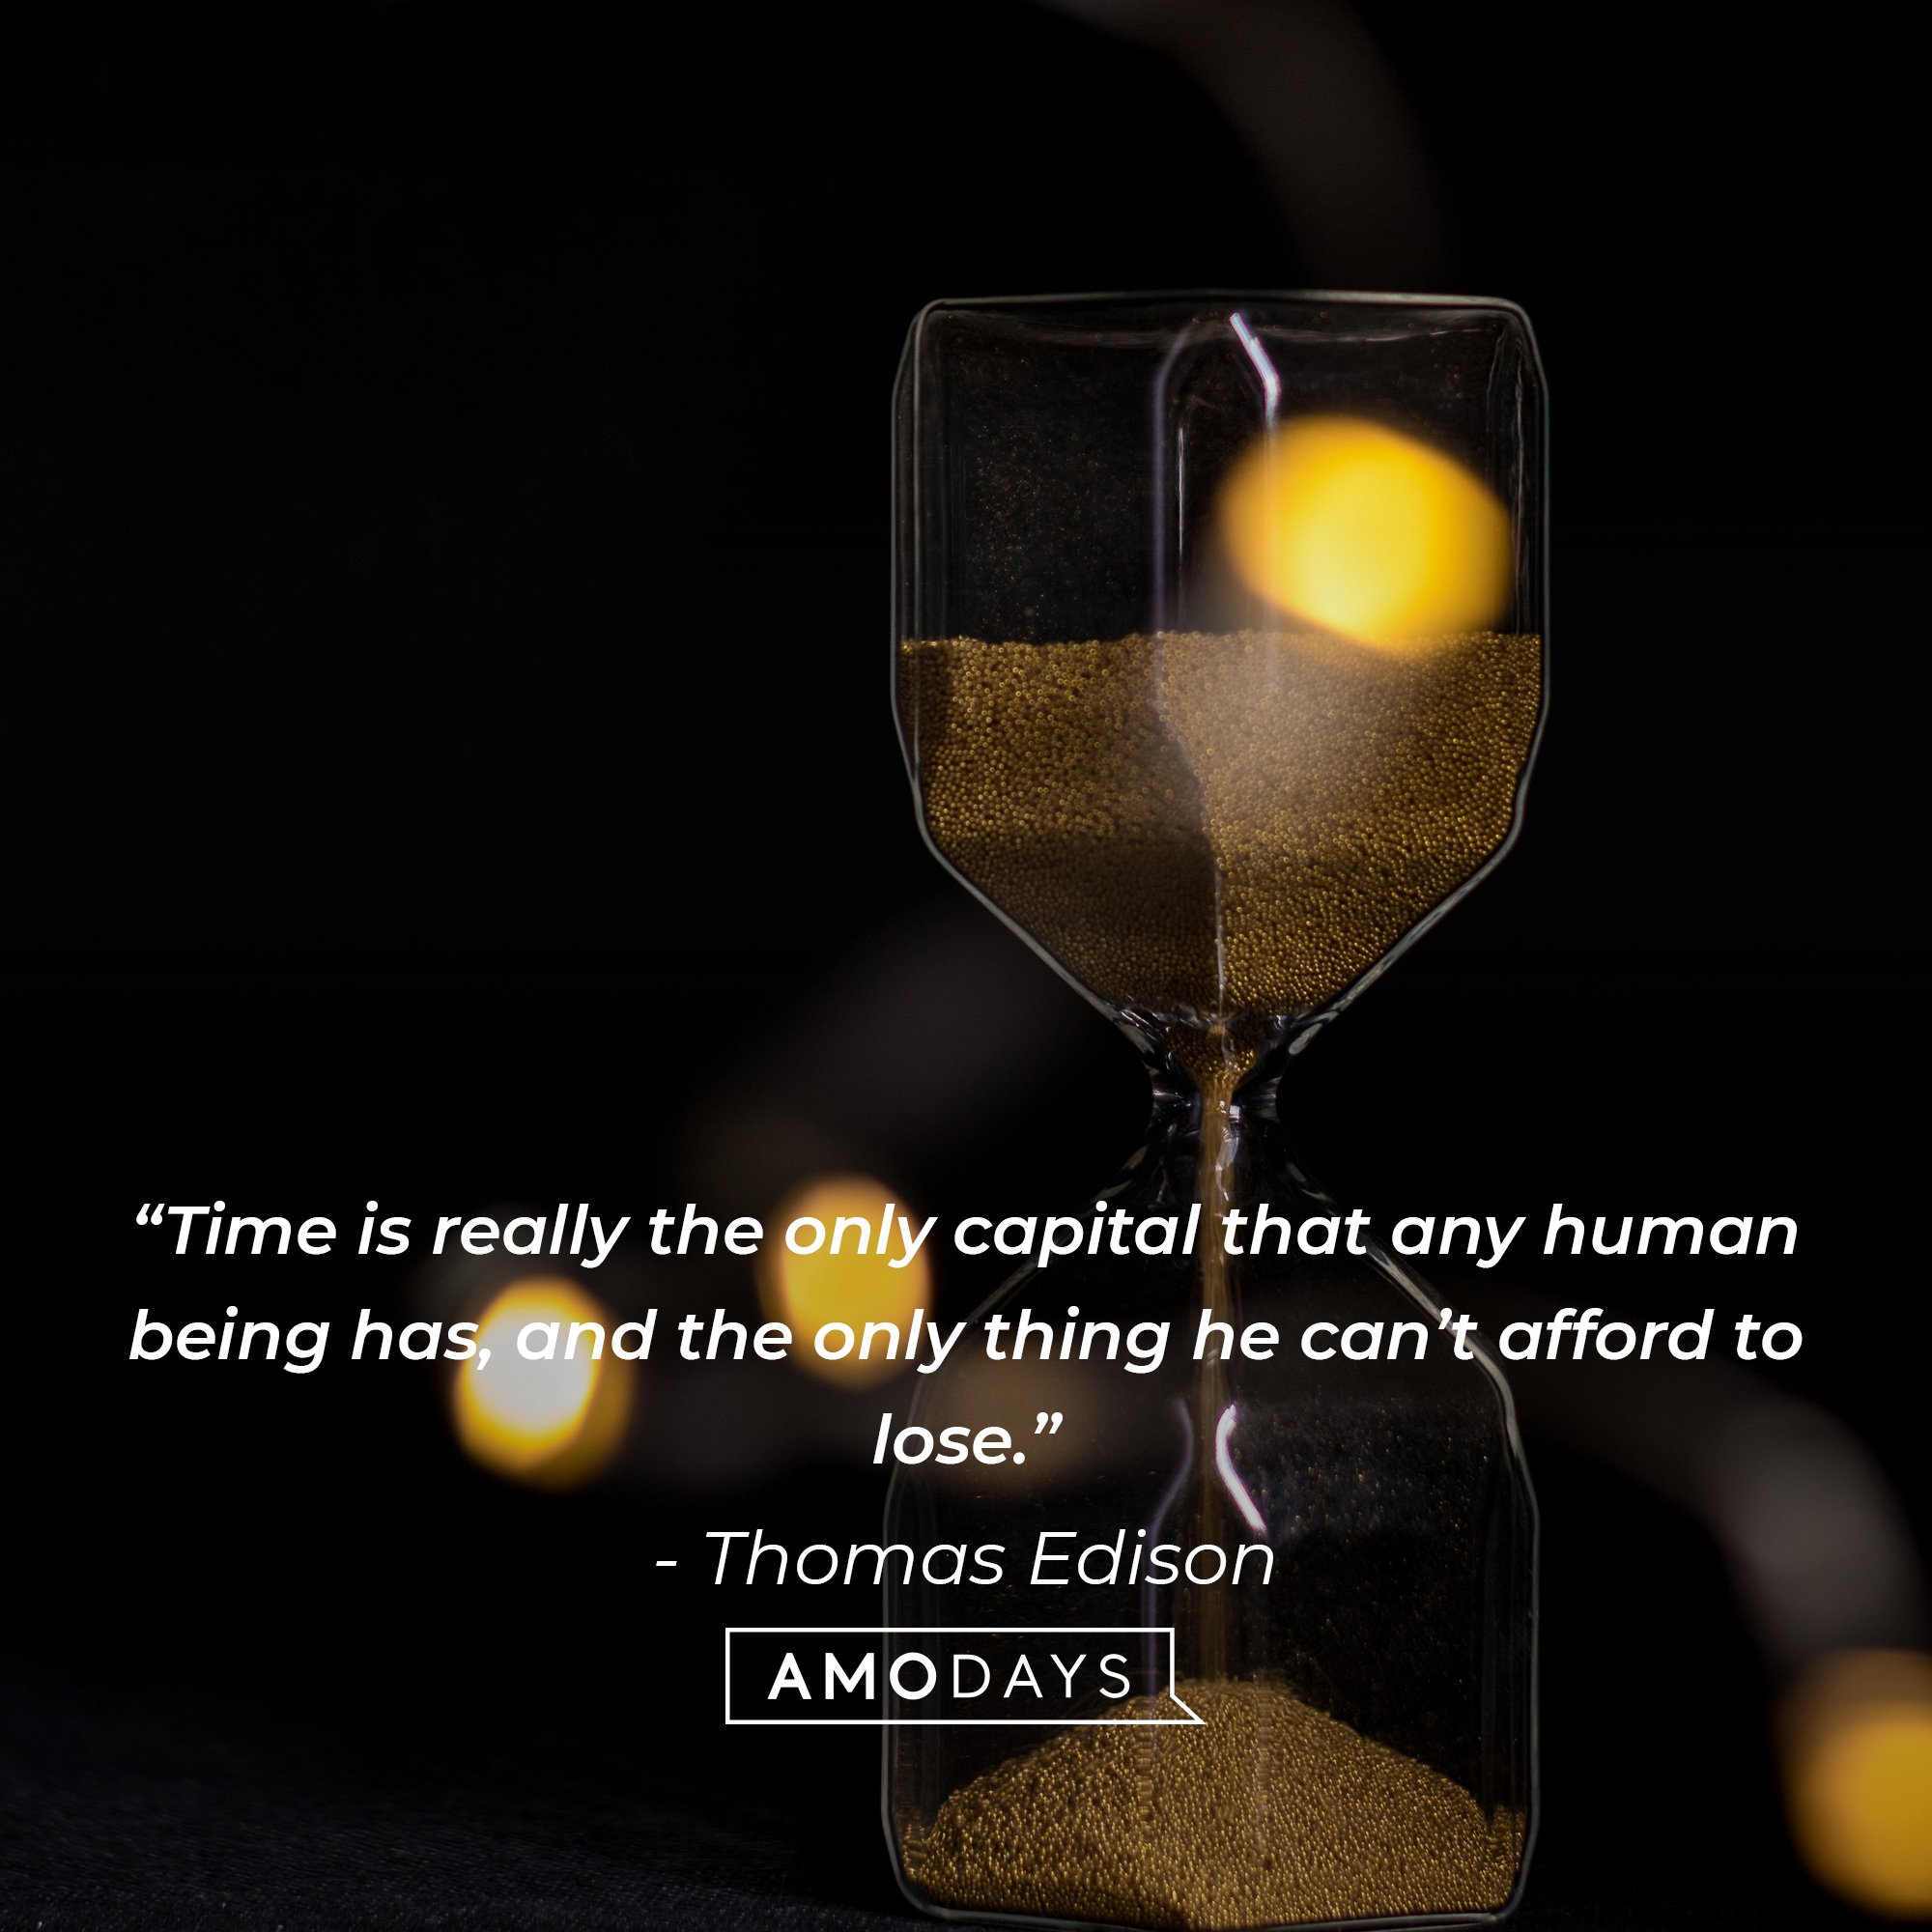 Thomas Edison's quote: “Time is really the only capital that any human being has, and the only thing he can’t afford to lose.” | Image: AmoDays